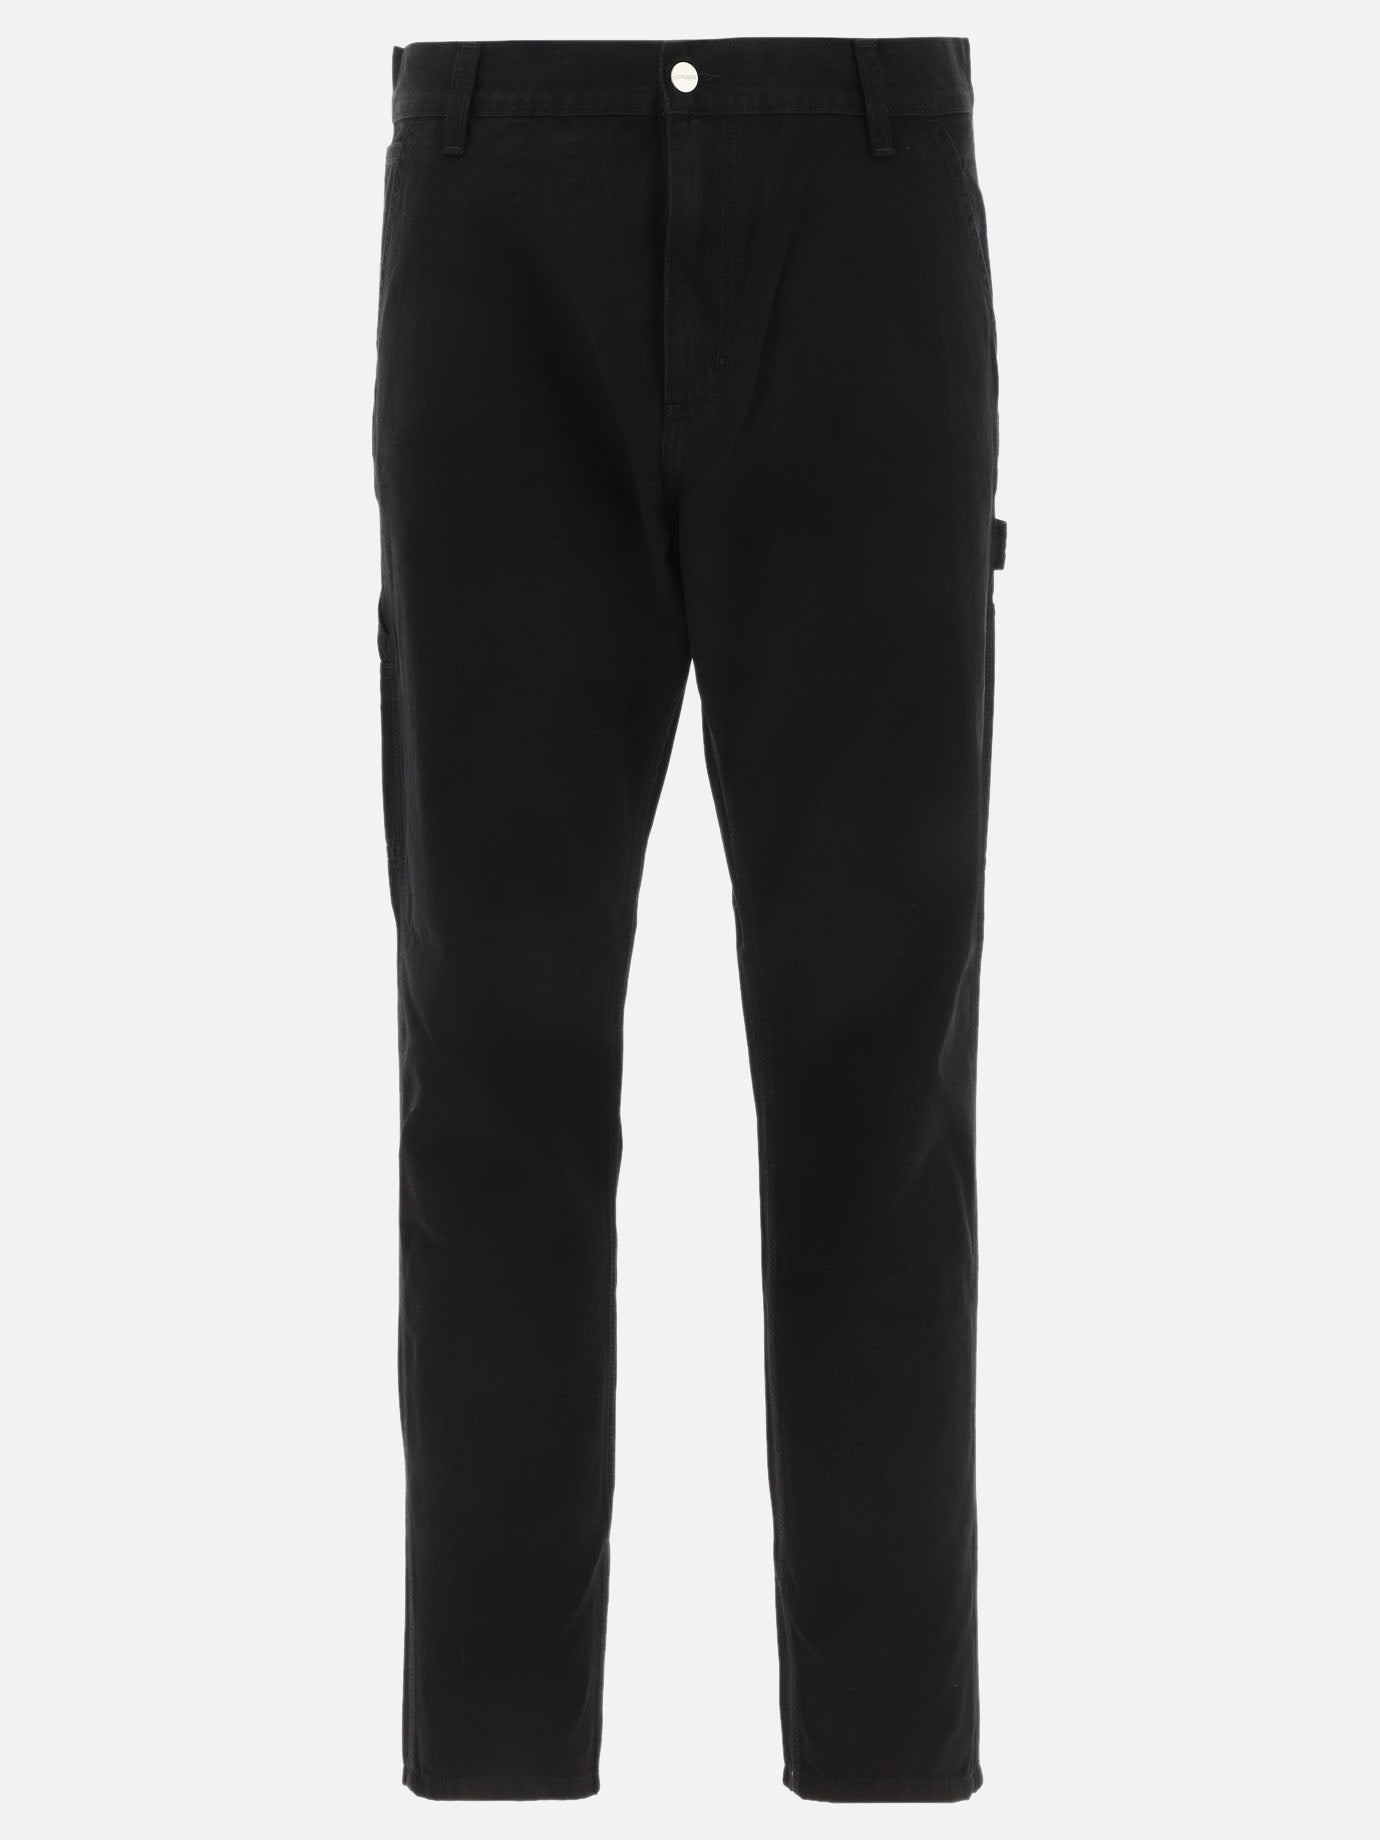 "Ruck Single Knee" trousers